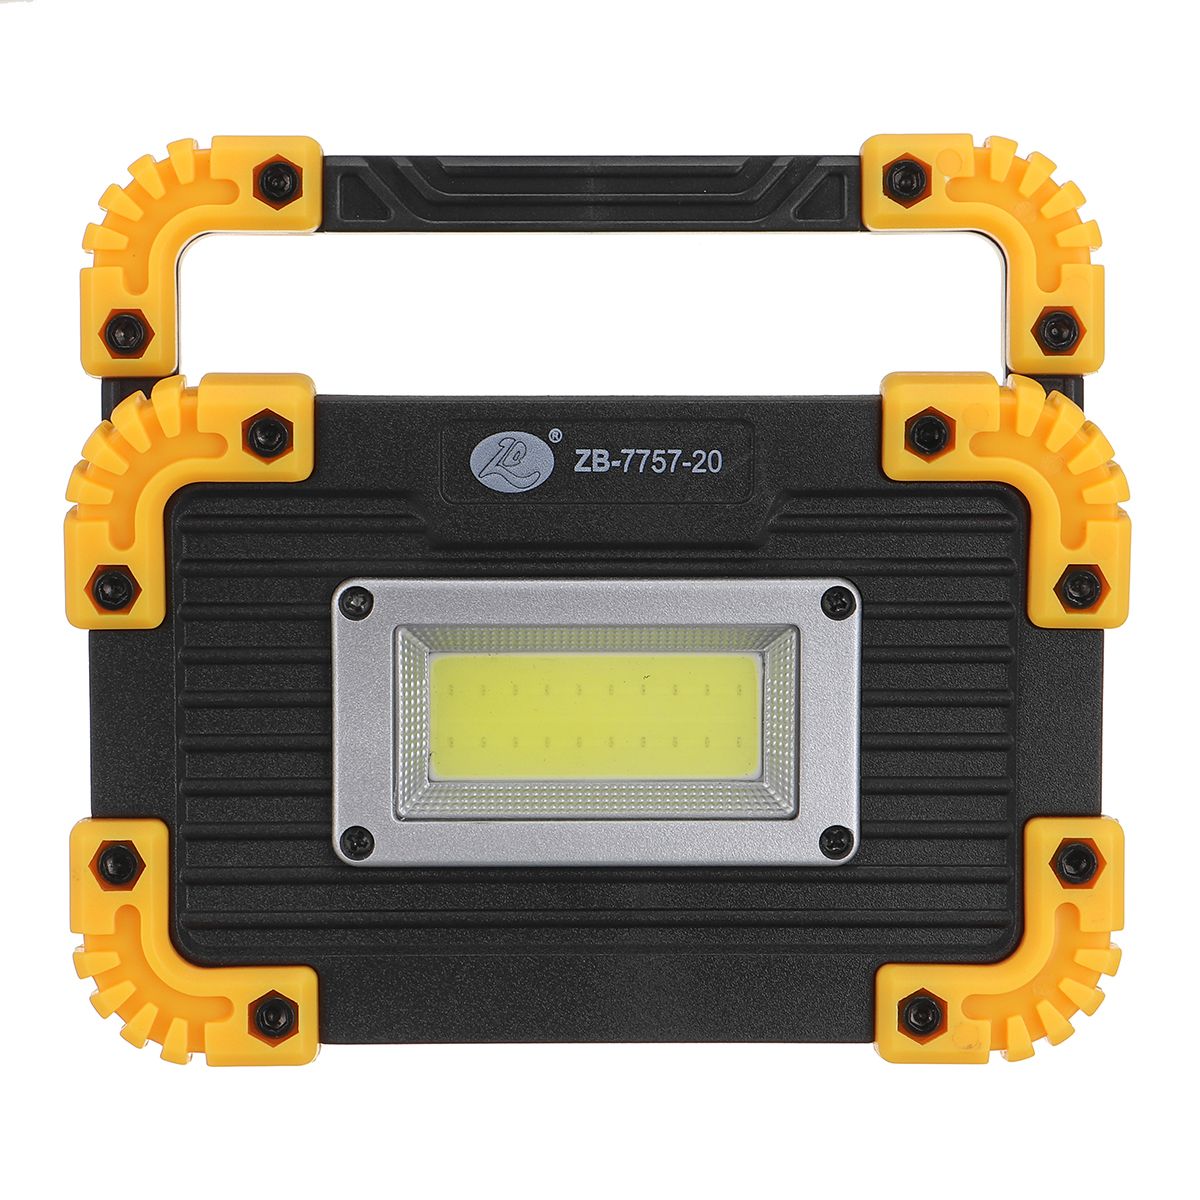 3-Mode-Outdoor-COB-LED-Floodlight-Spot-Work-Lamp-Camping-Hiking-Battery-Powered-1741719